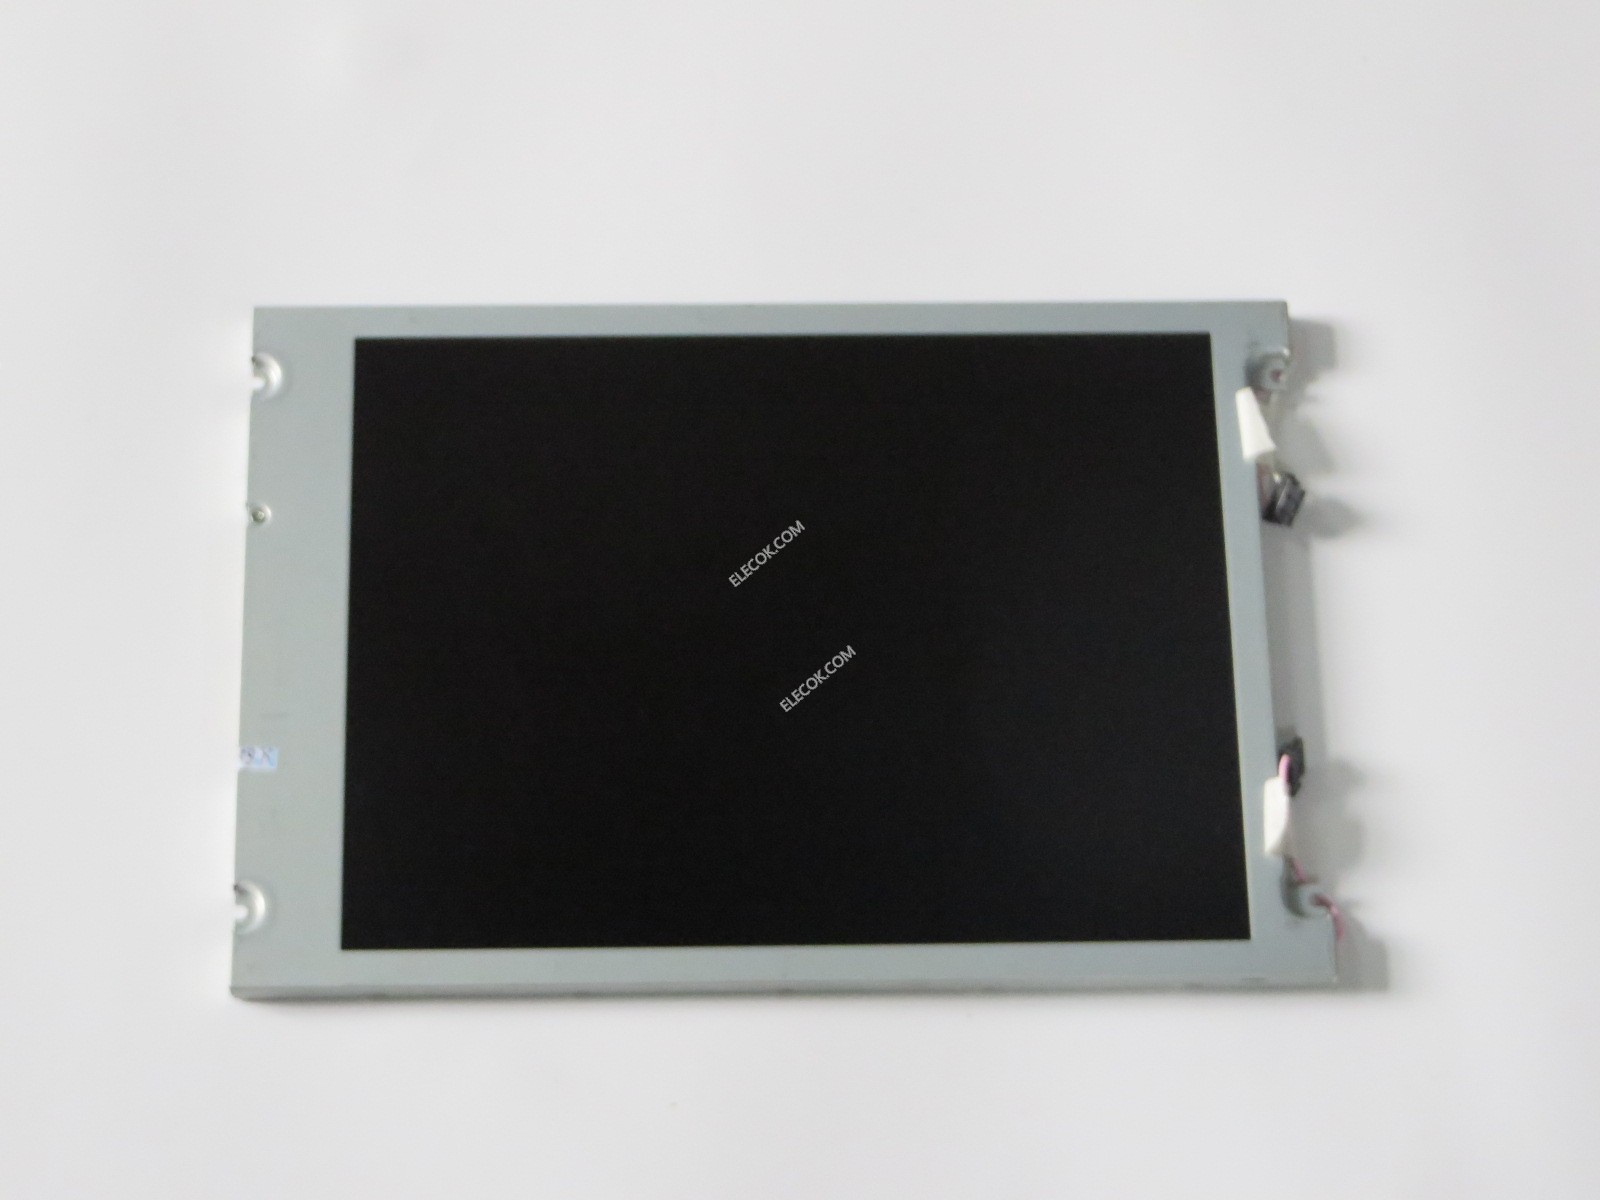 LCD screen panel 10.4” 640 × 480 Resolution replace KCB104VG2BA-A21 